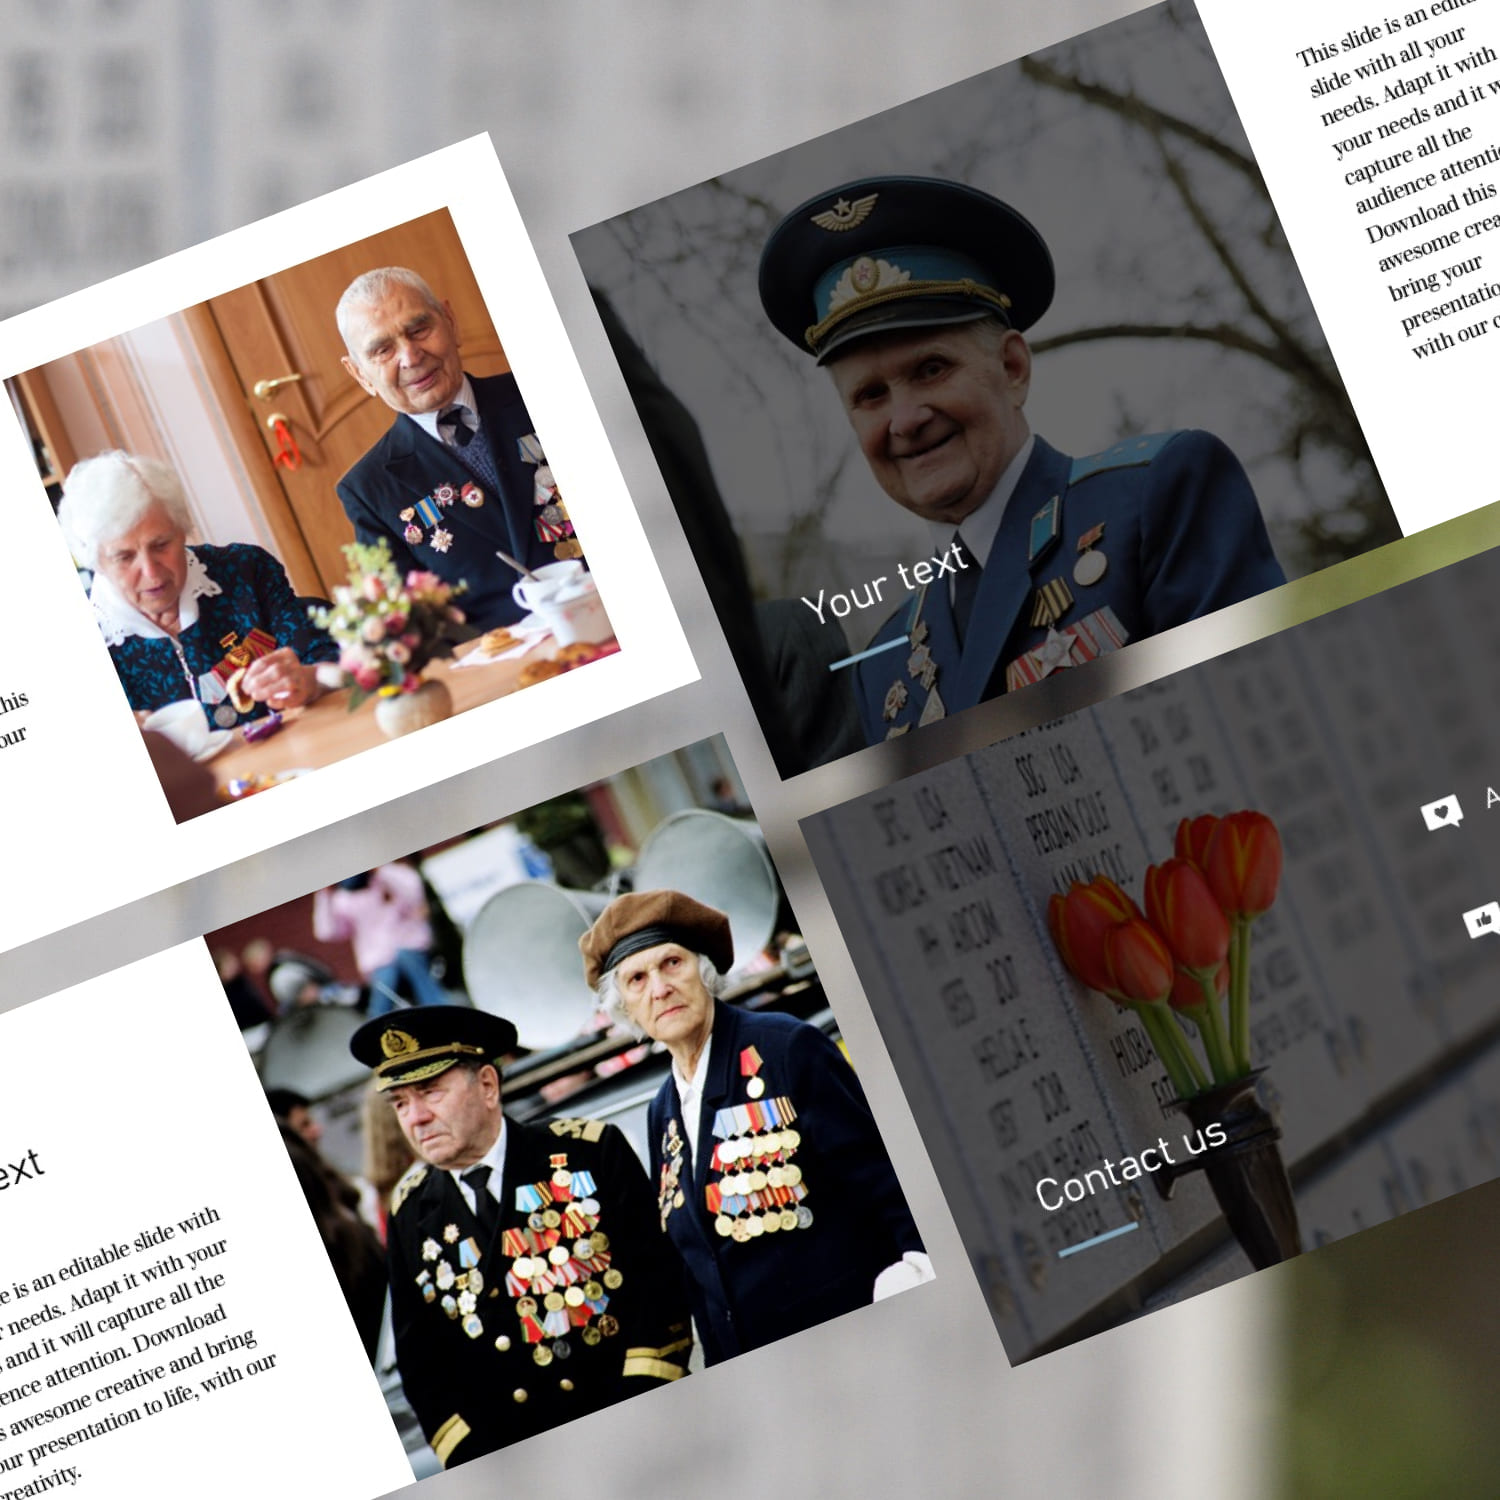 Slide show with images of veterans.